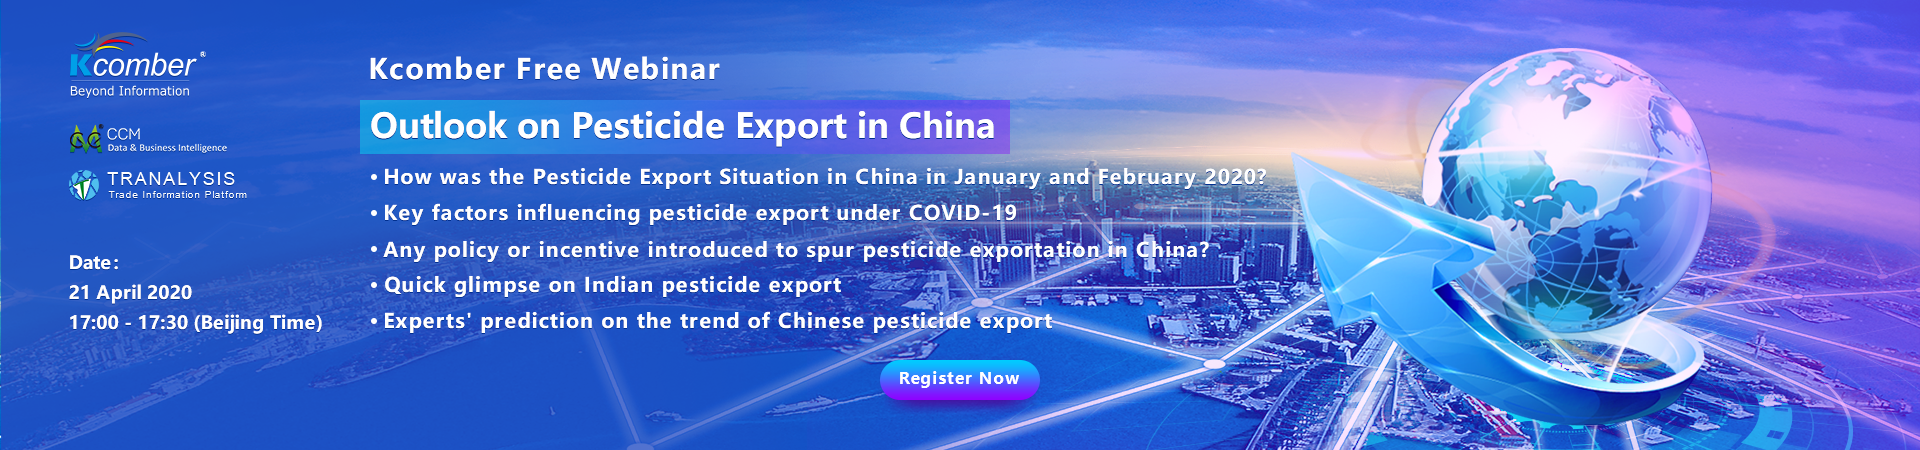 Outlook on Pesticide Export in China